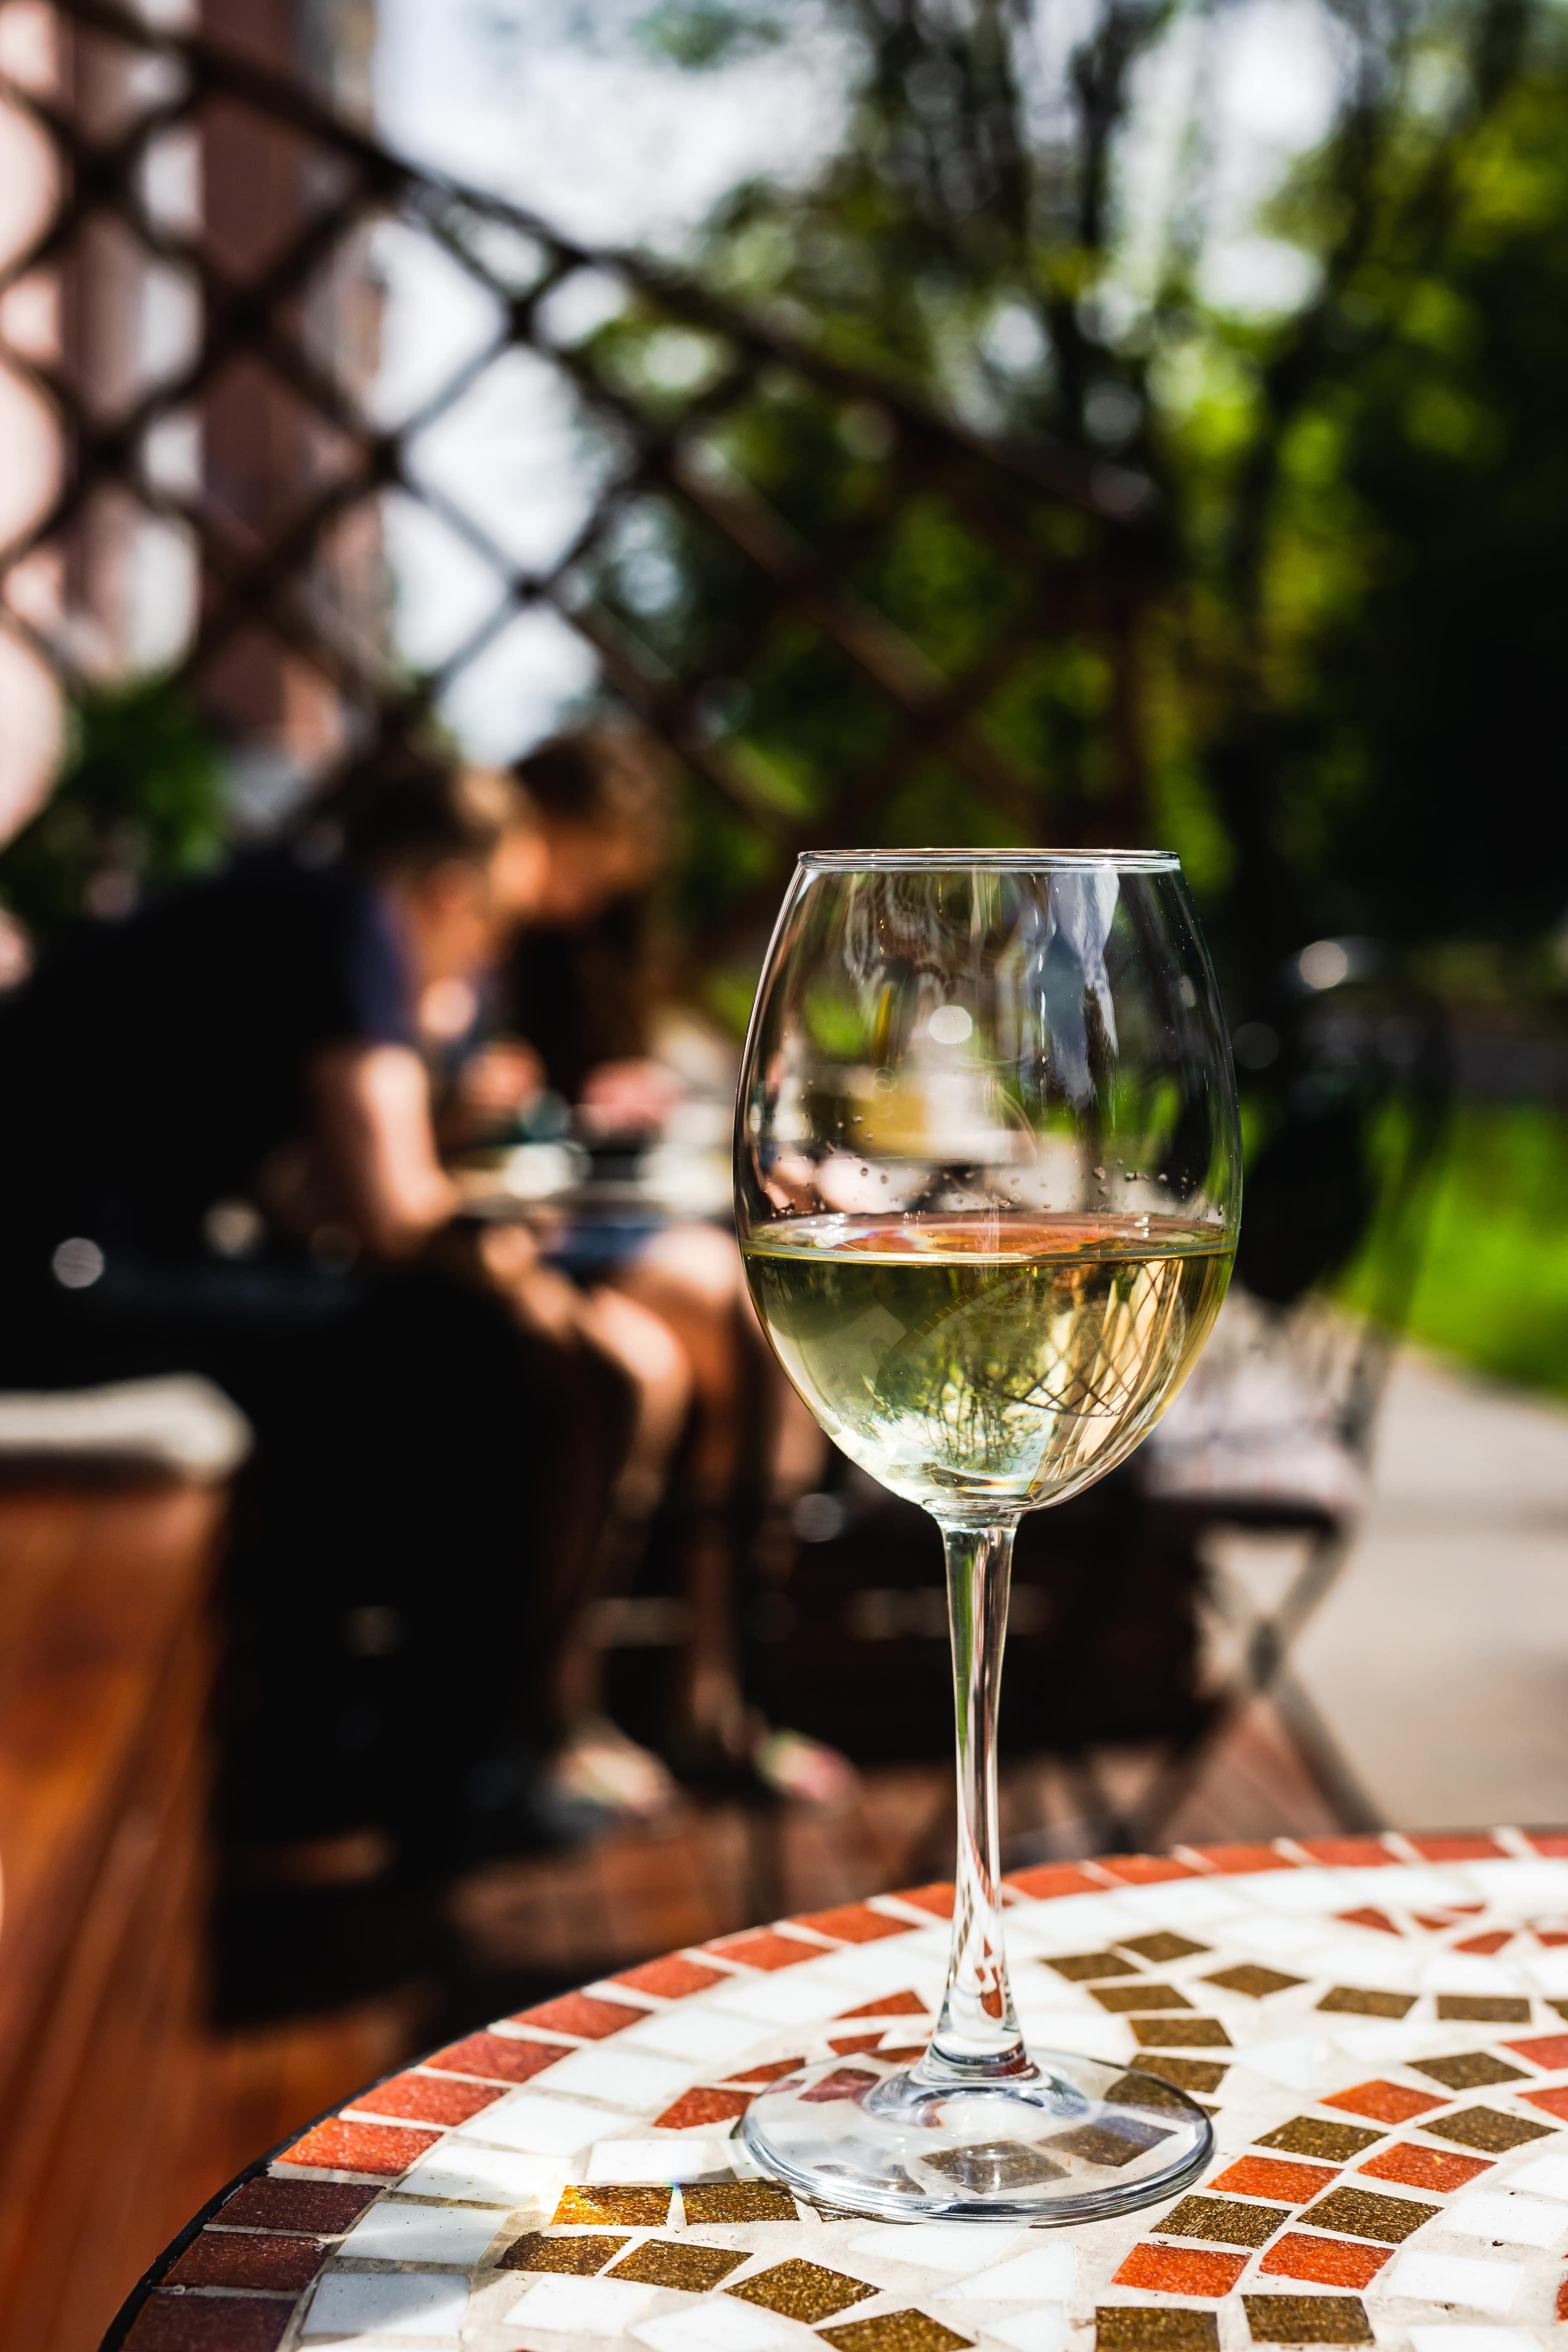 a-glass-of-white-wine-on-a-mosaic-stone-table-of-a-cafe-terrace-on-a-sunny-day-min